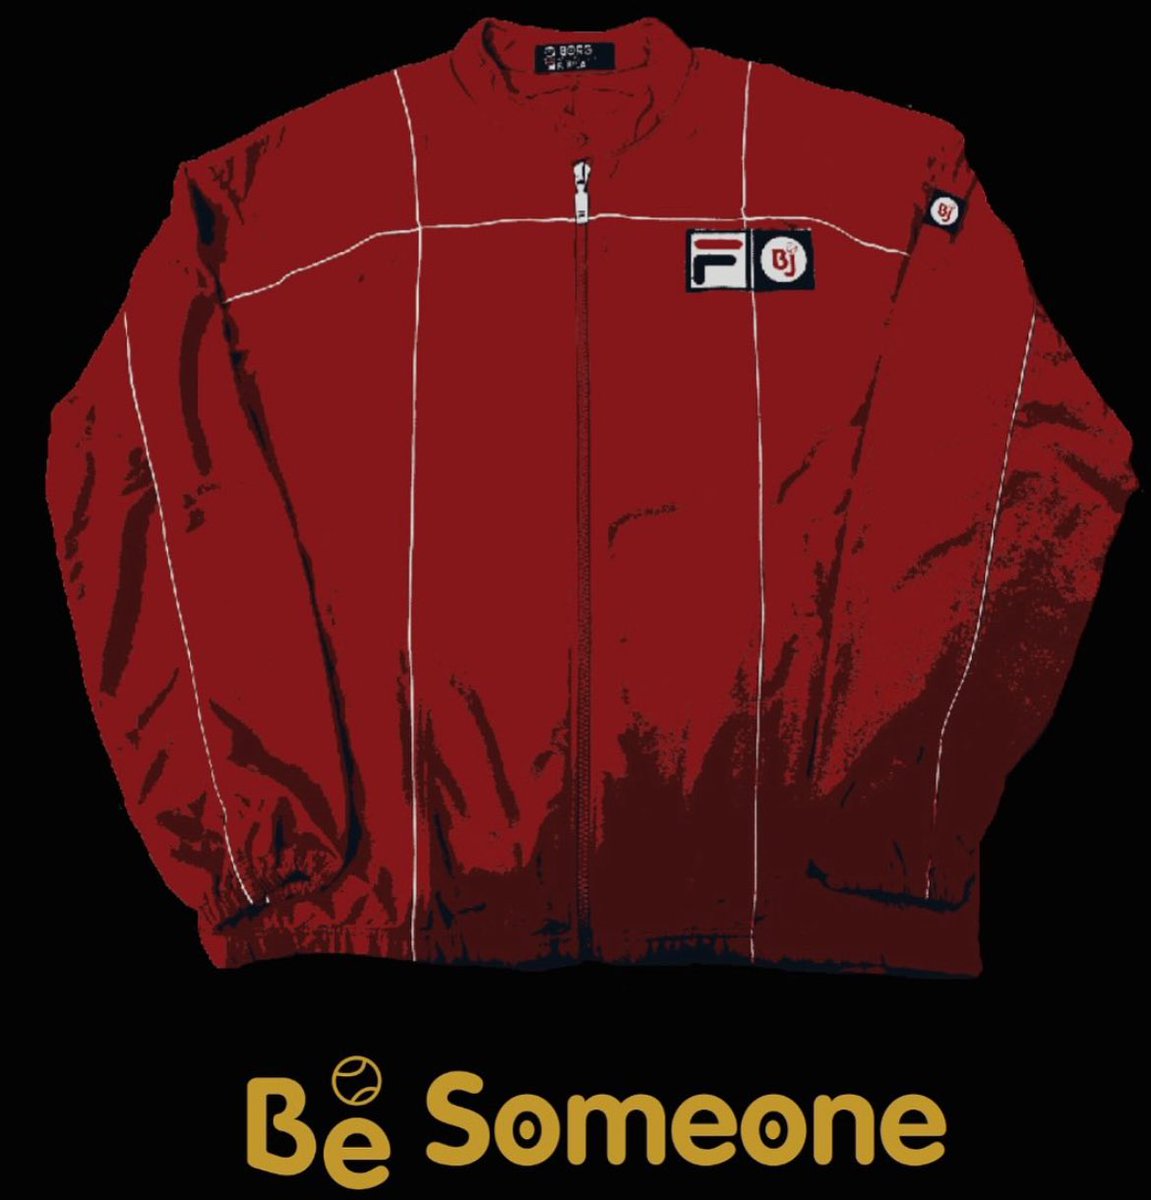 It’s nearly the weekend. Be Someone. 80scasuals.co.uk